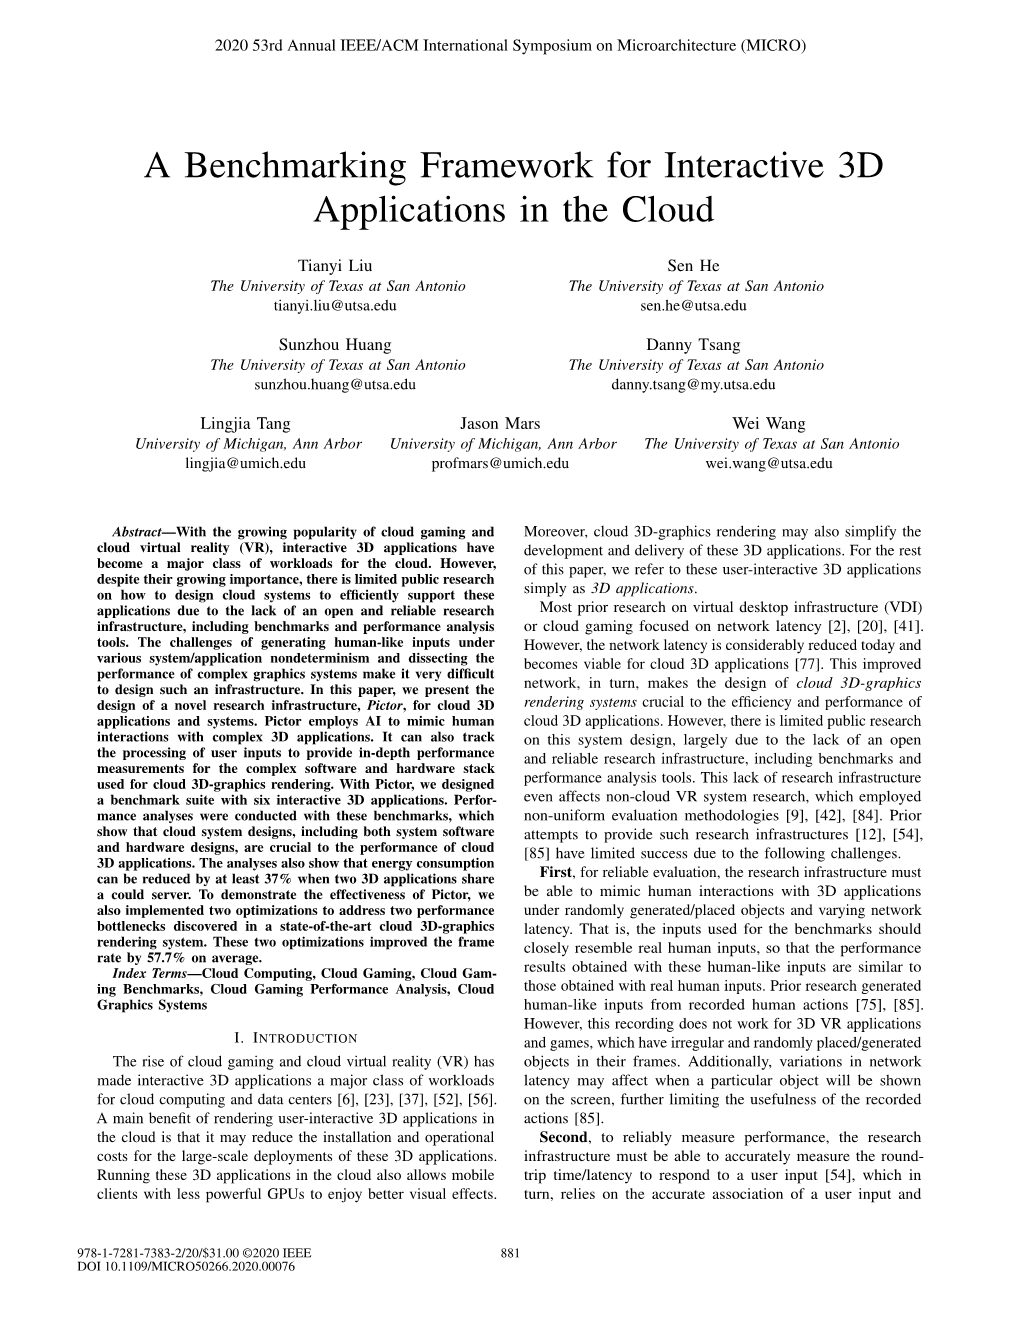 A Benchmarking Framework for Interactive 3D Applications in the Cloud